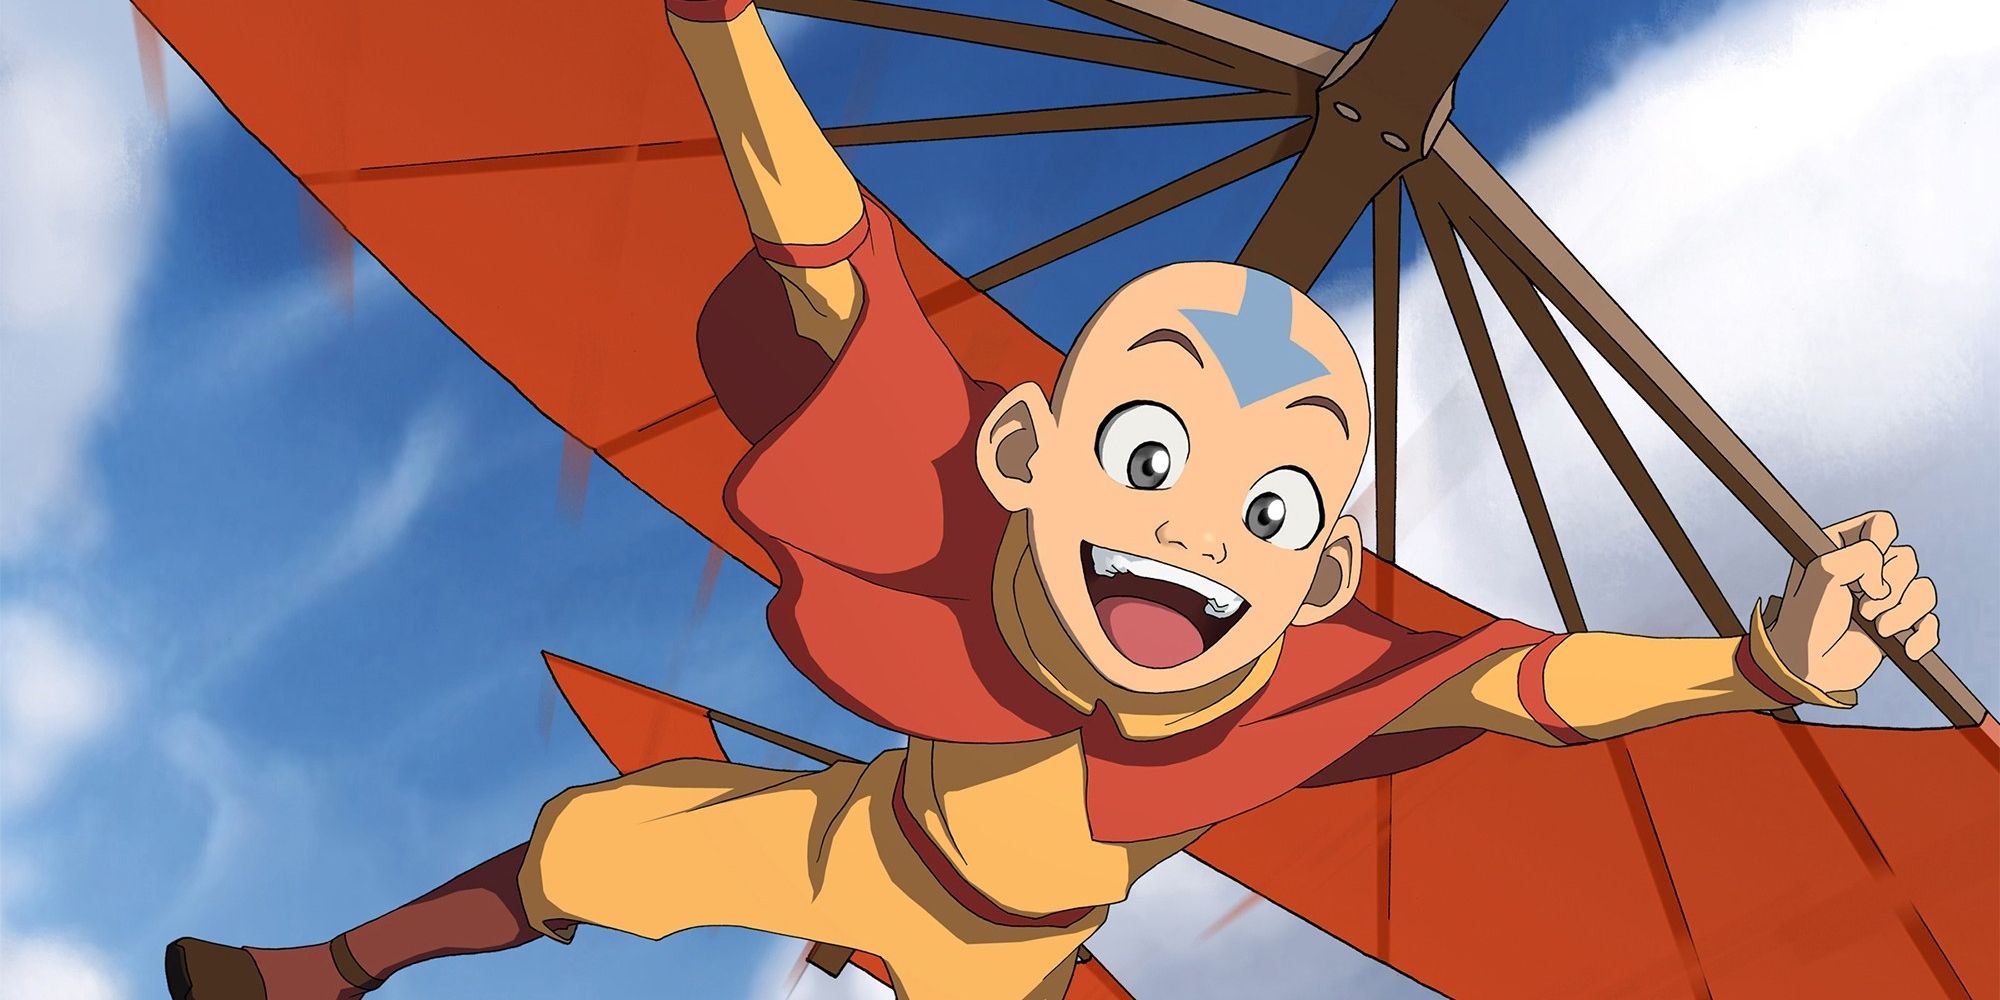 Aang flying with his glider